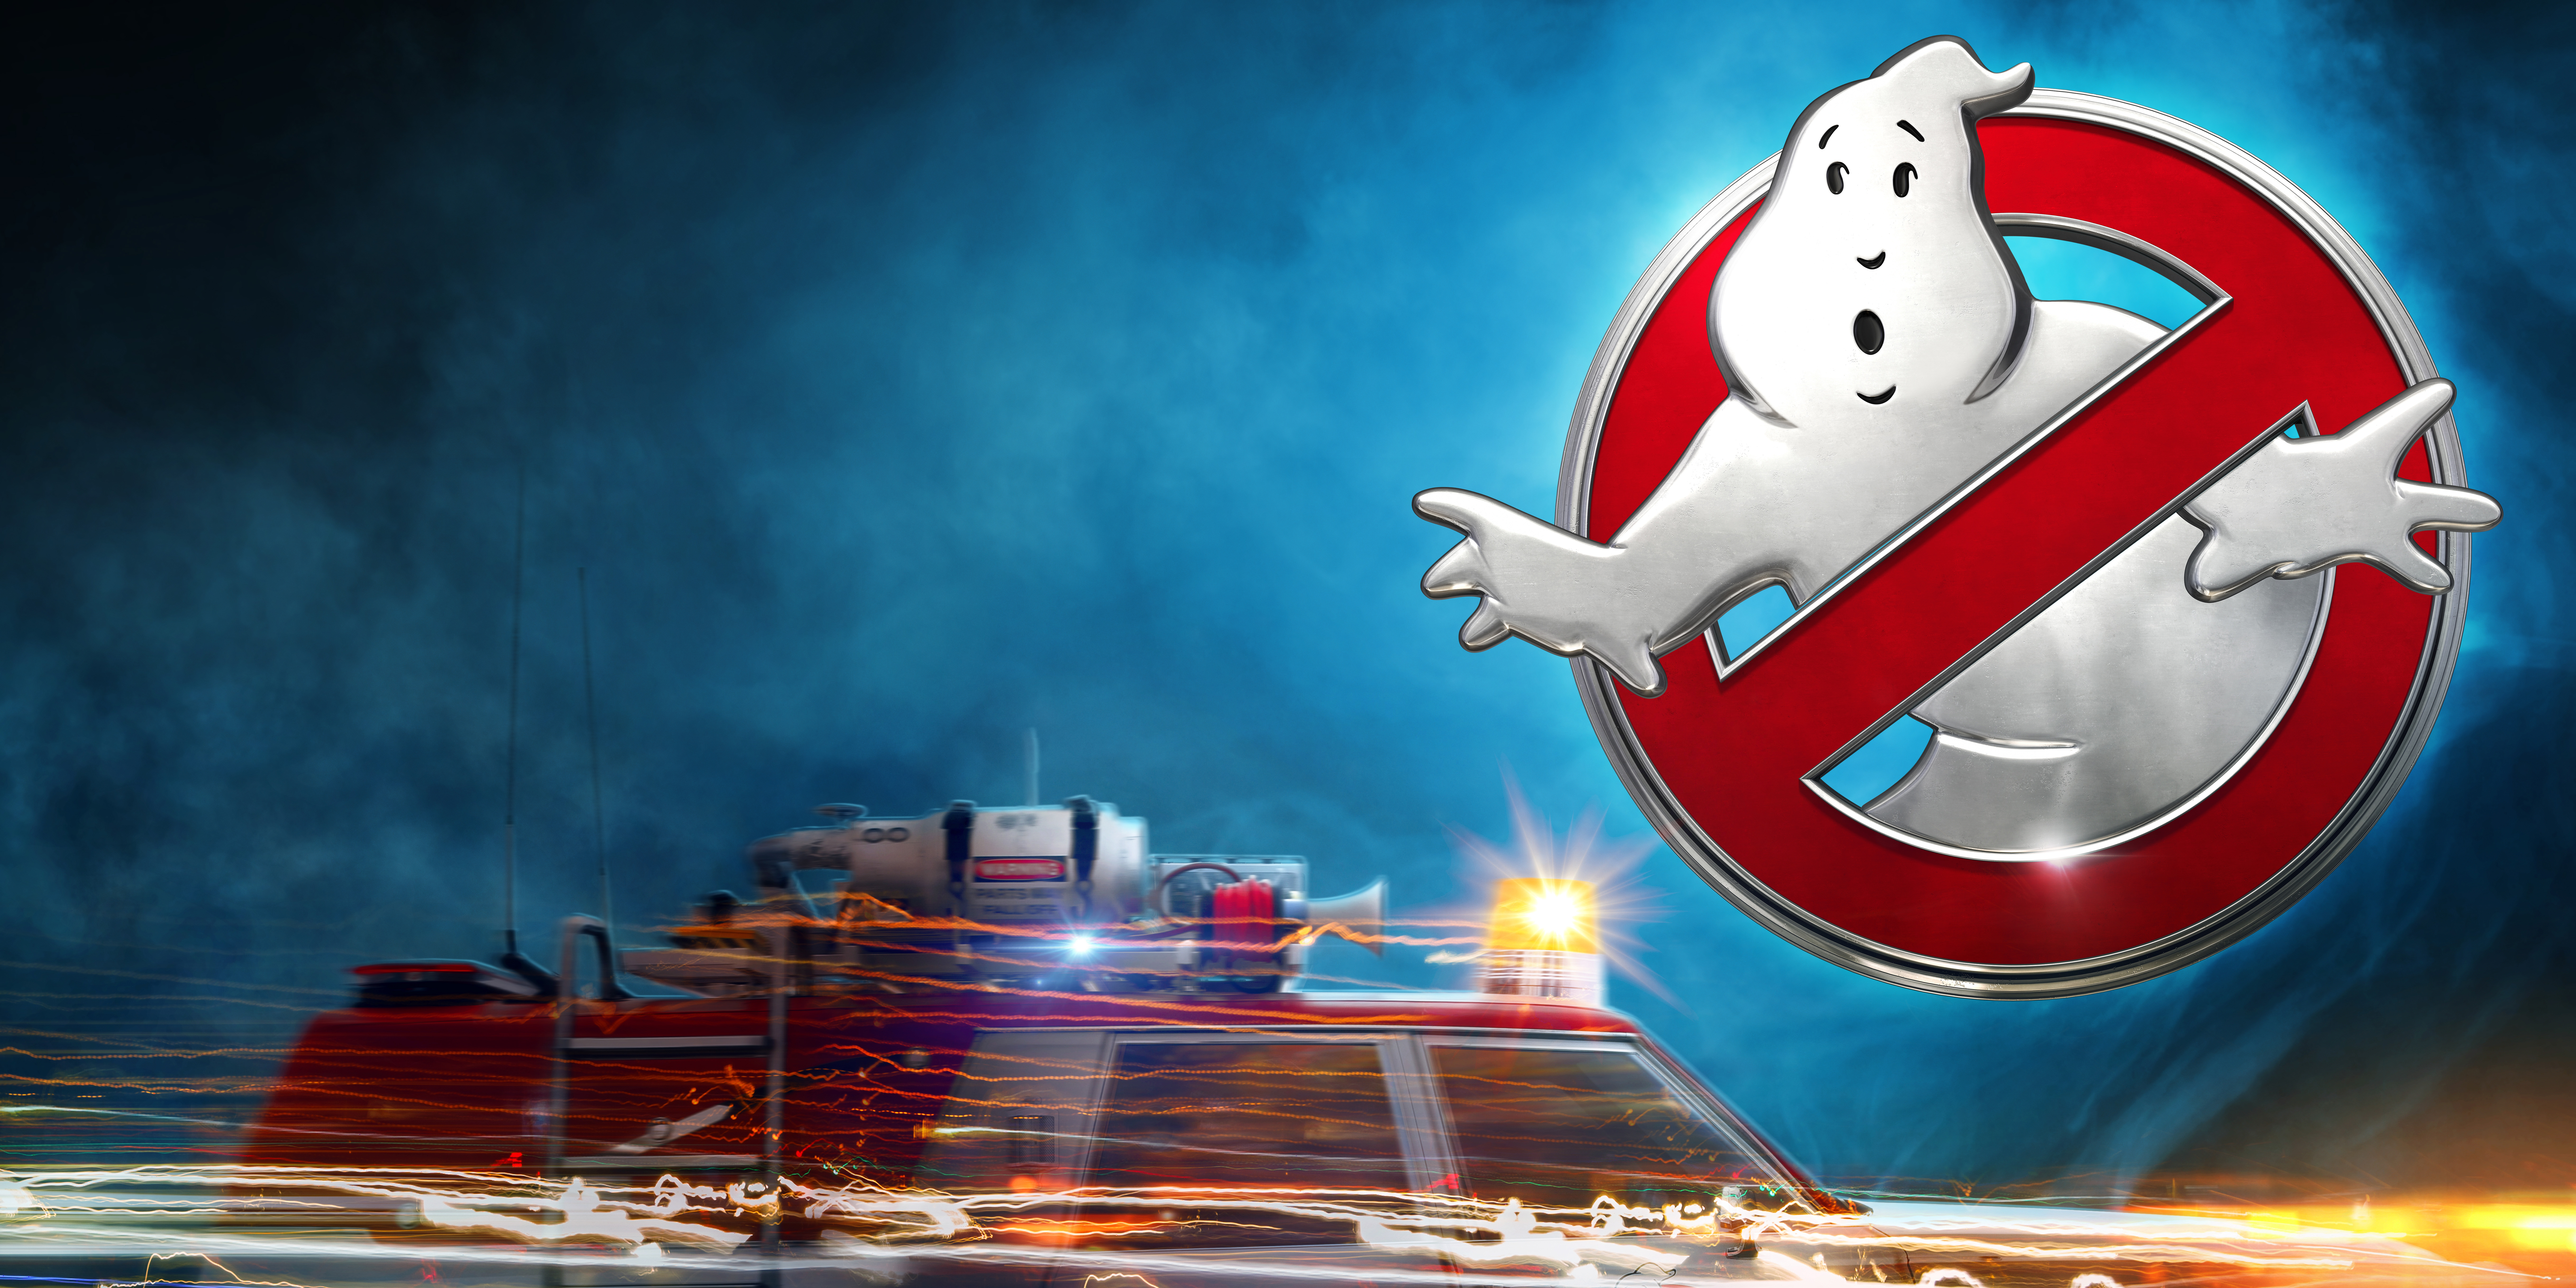 Ghostbusters: Afterlife Wallpapers